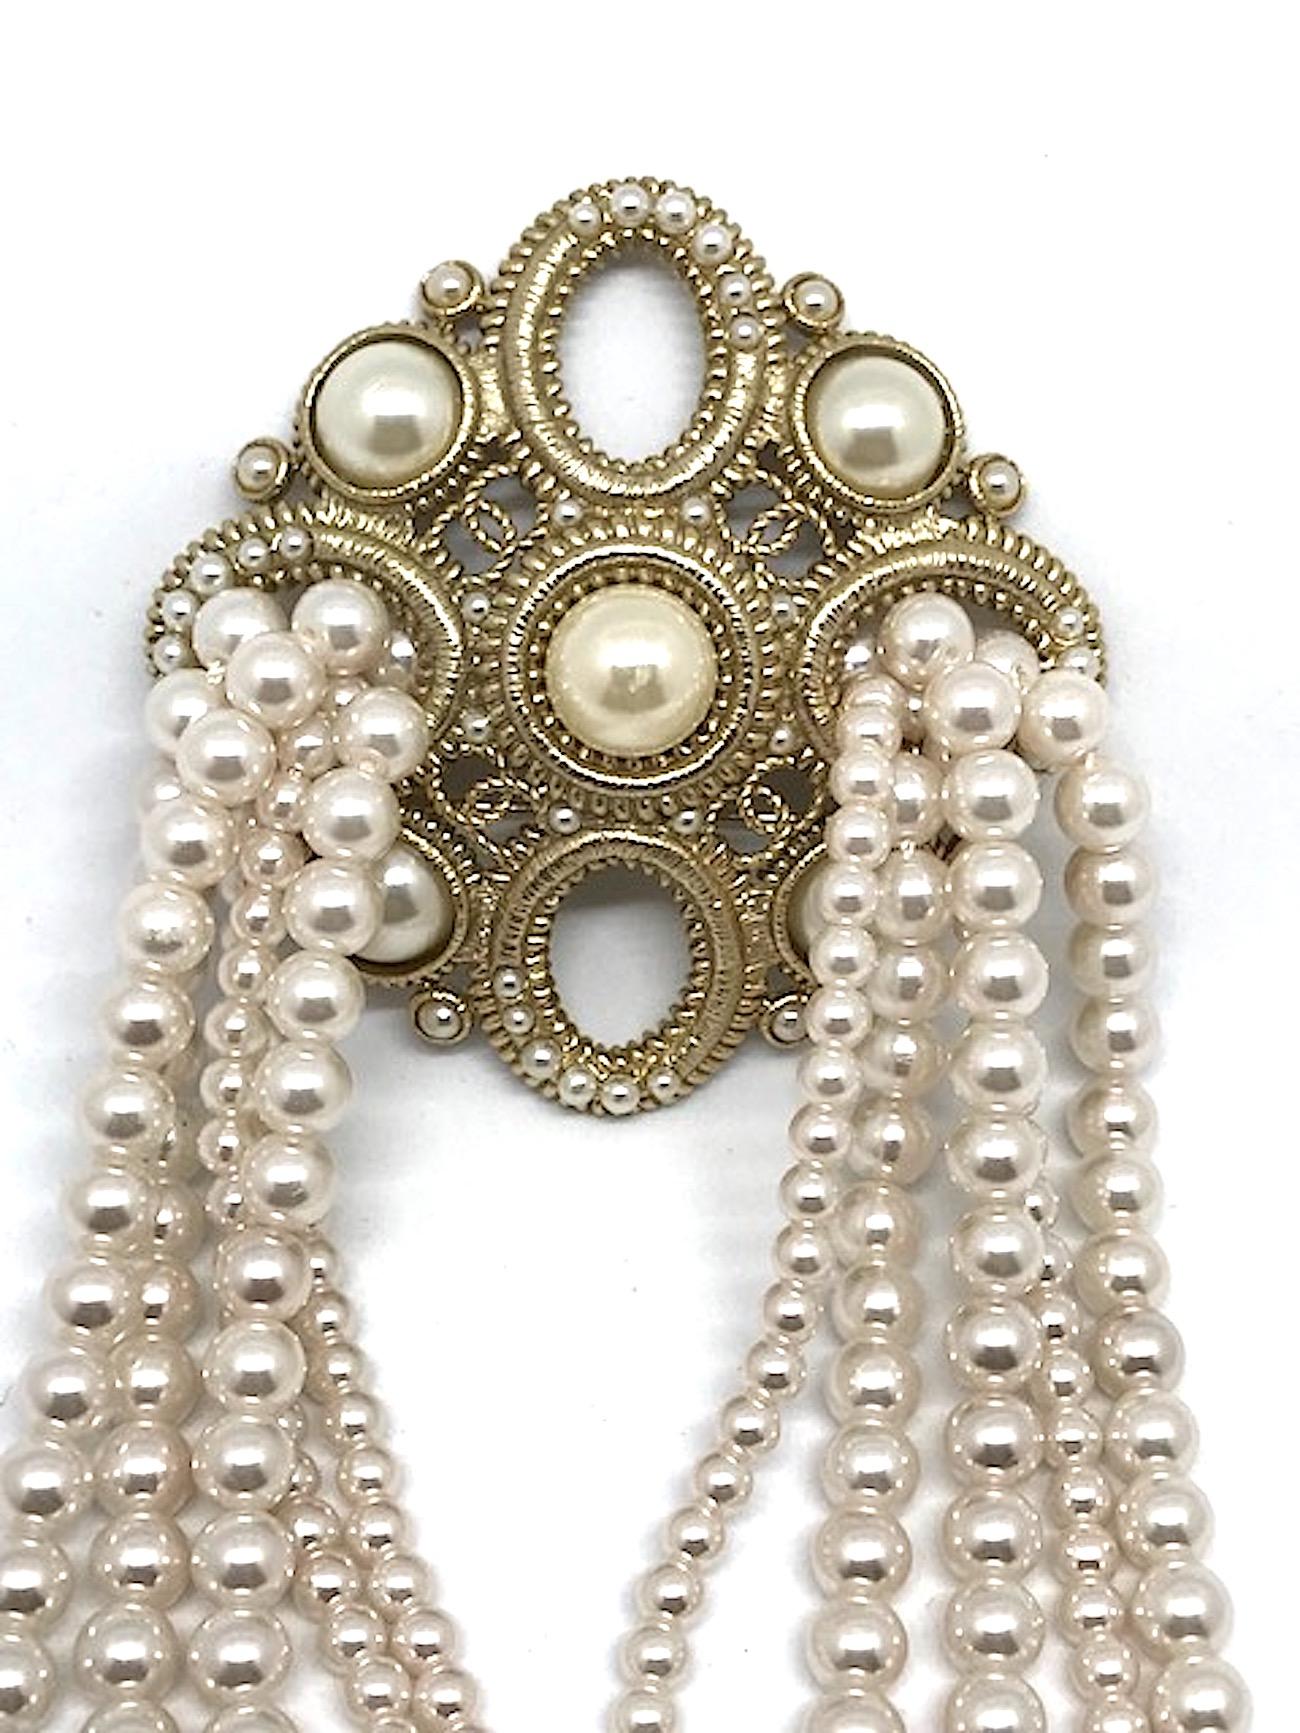 Chanel Dramatic & Large Medallion with Pearl Fringe Pin, 2015 Collection 2